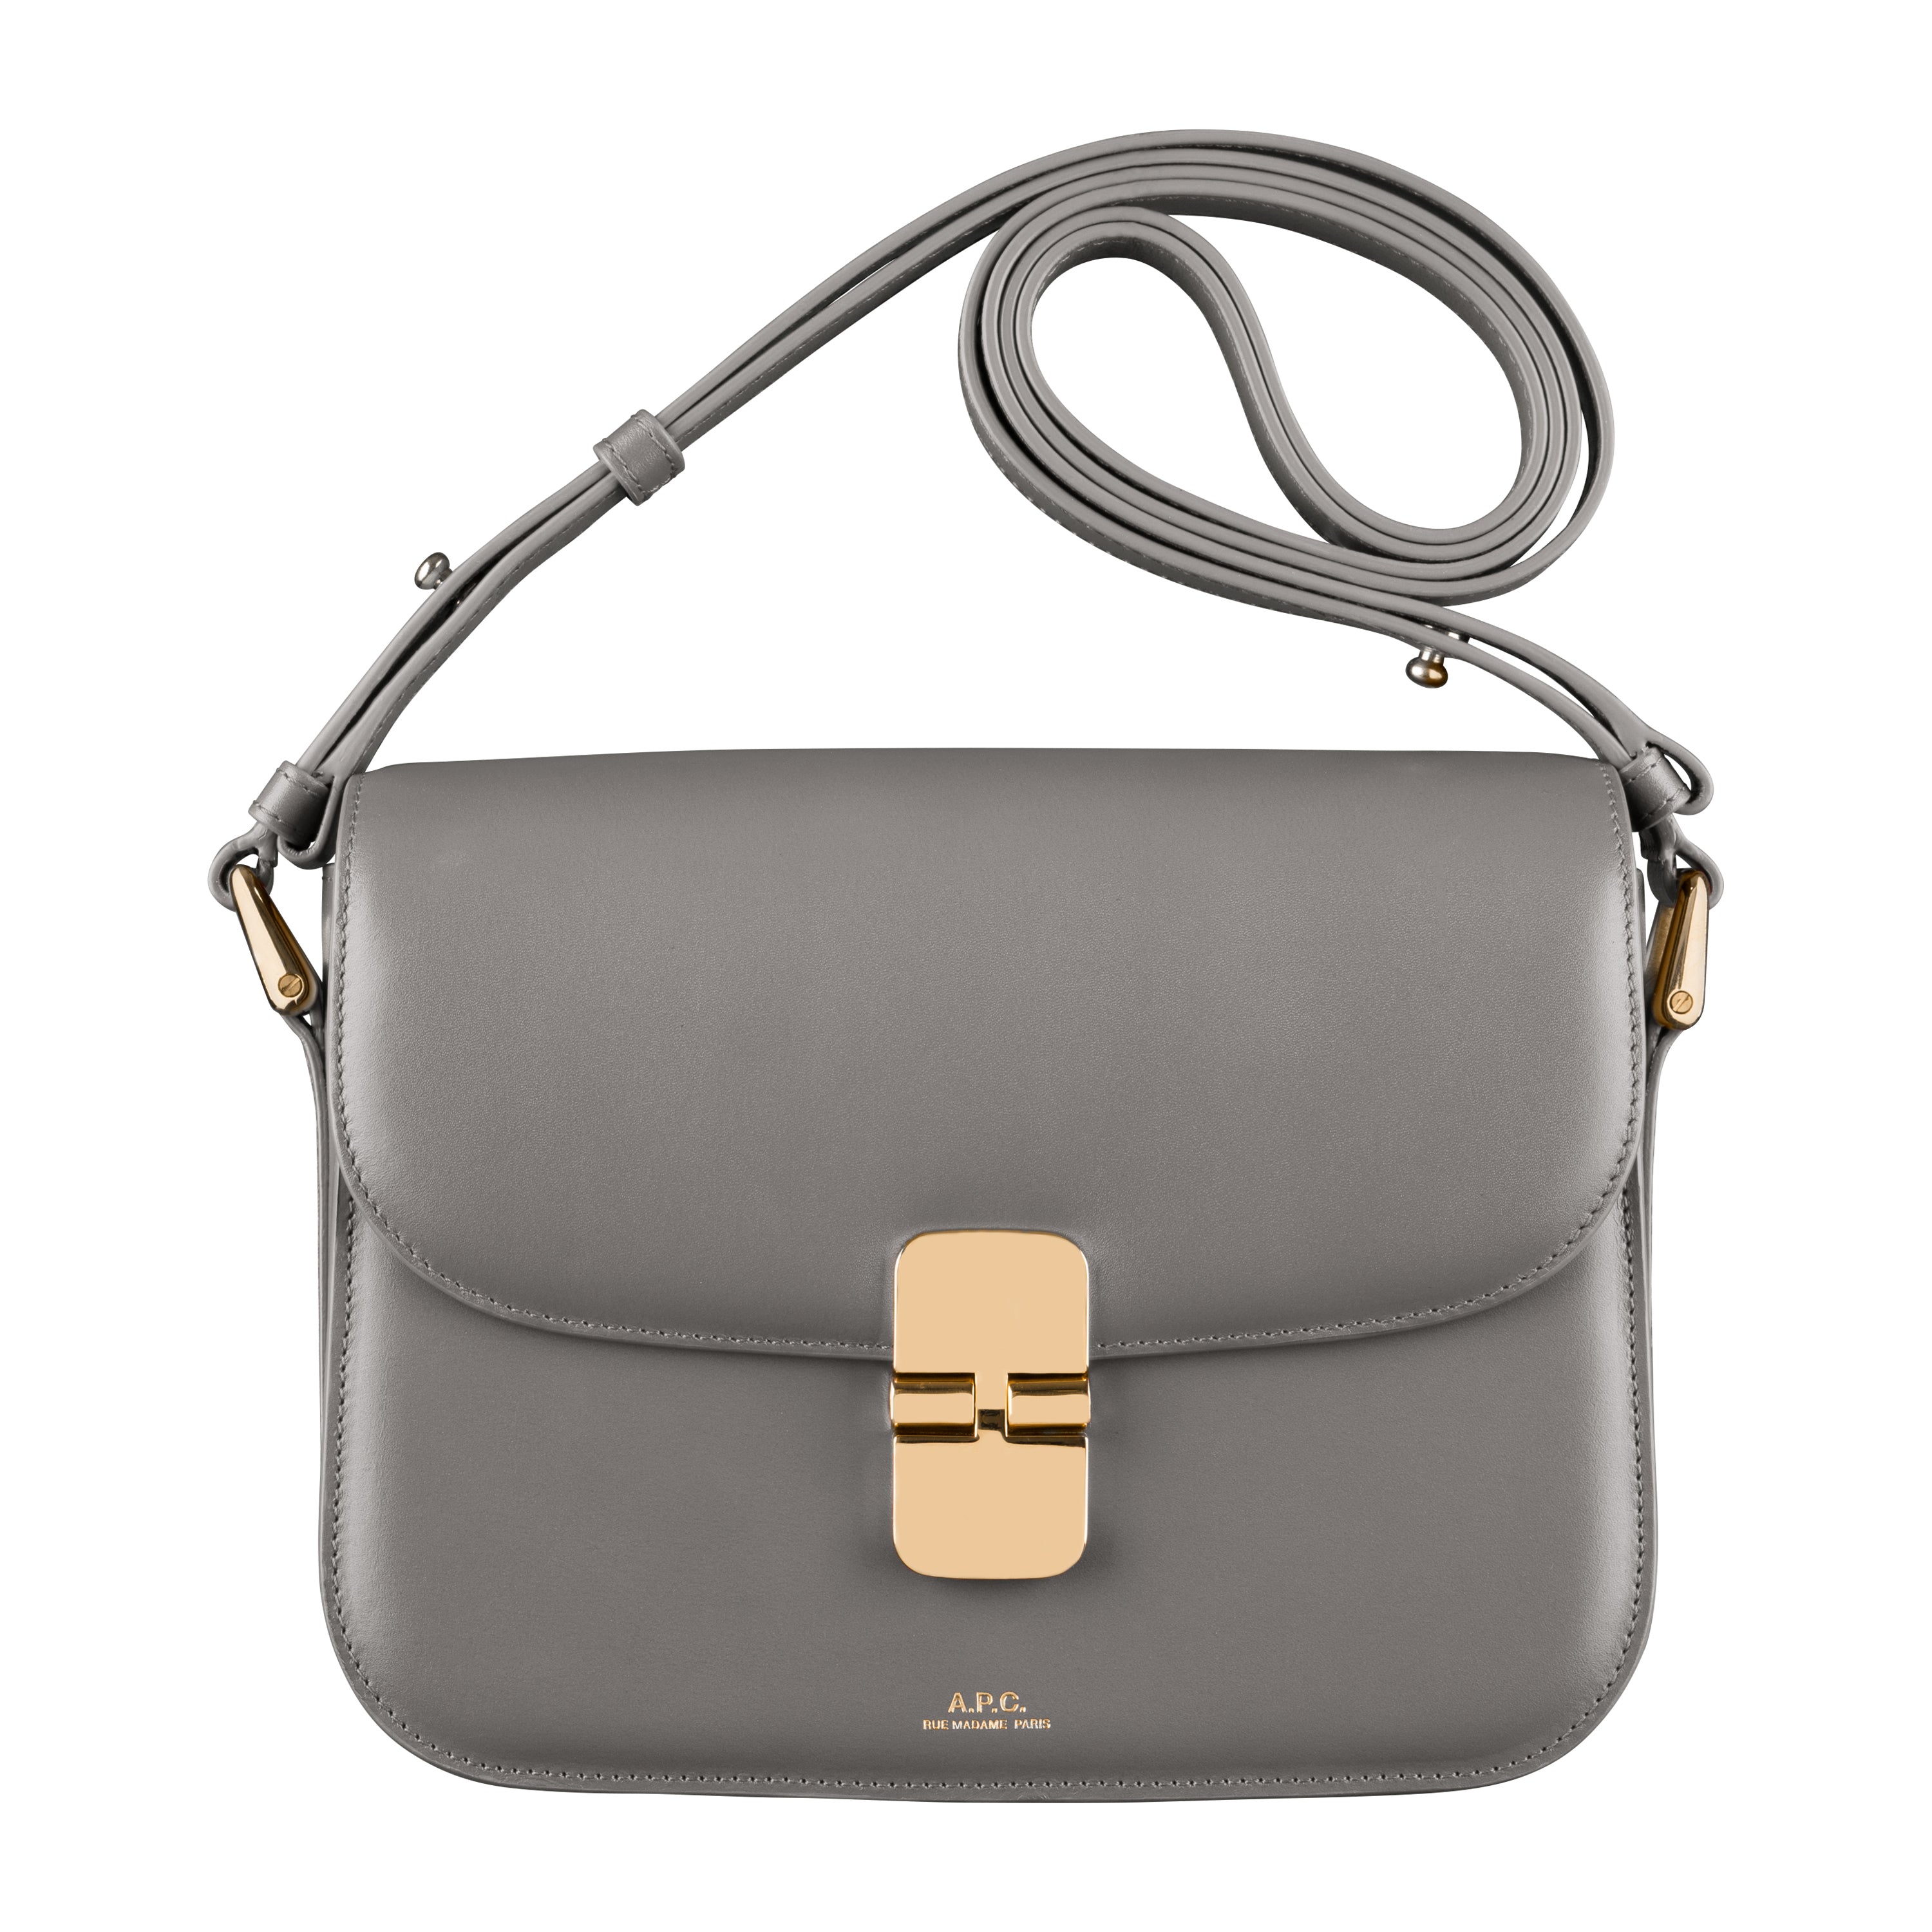 A.P.C. Small Grace bag  what fits, pricing, specs, wear and tear 